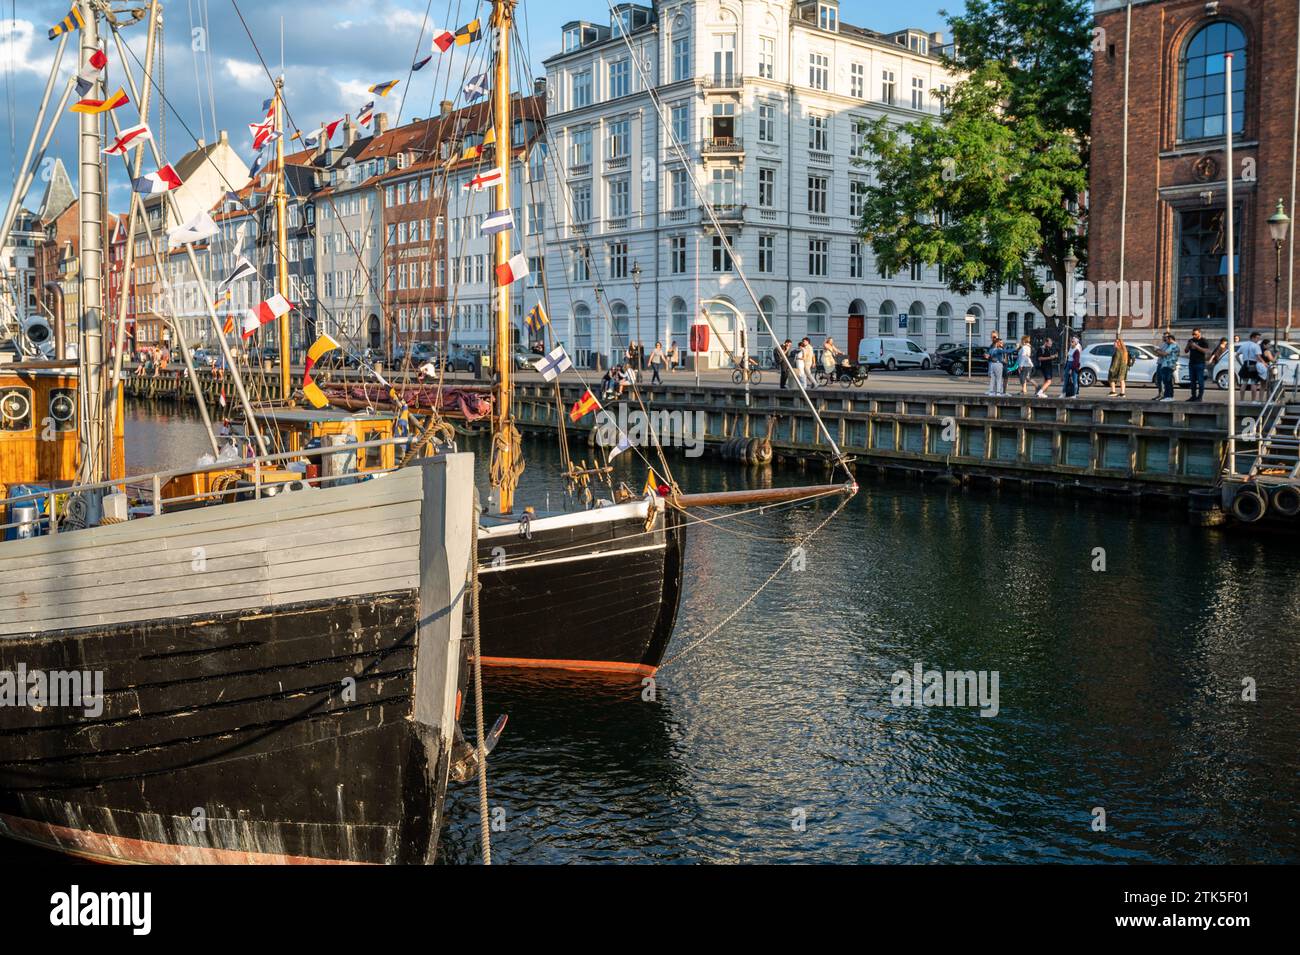 Colorfull facade and old ships along the Nyhavn Canal in Copenhagen Denmark Stock Photo